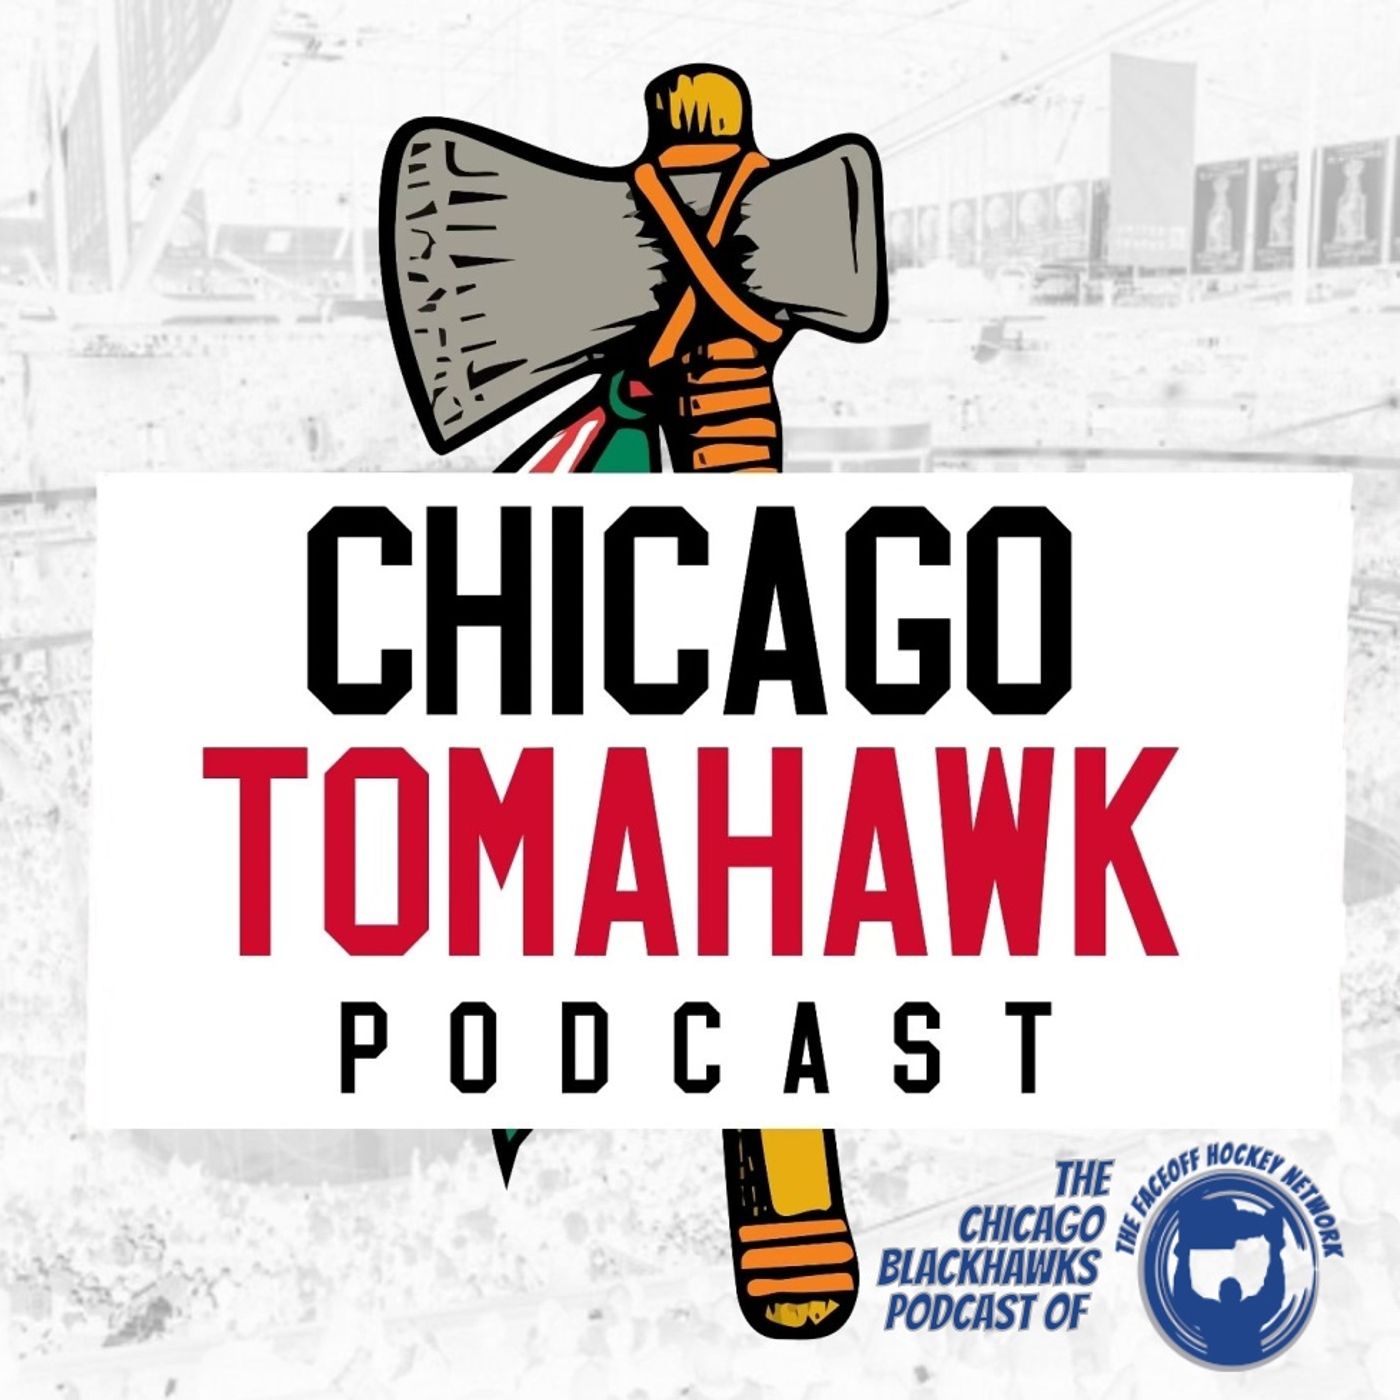 Artwork for podcast Chicago TomaHawk: A Podcast on The Chicago Blackhawks